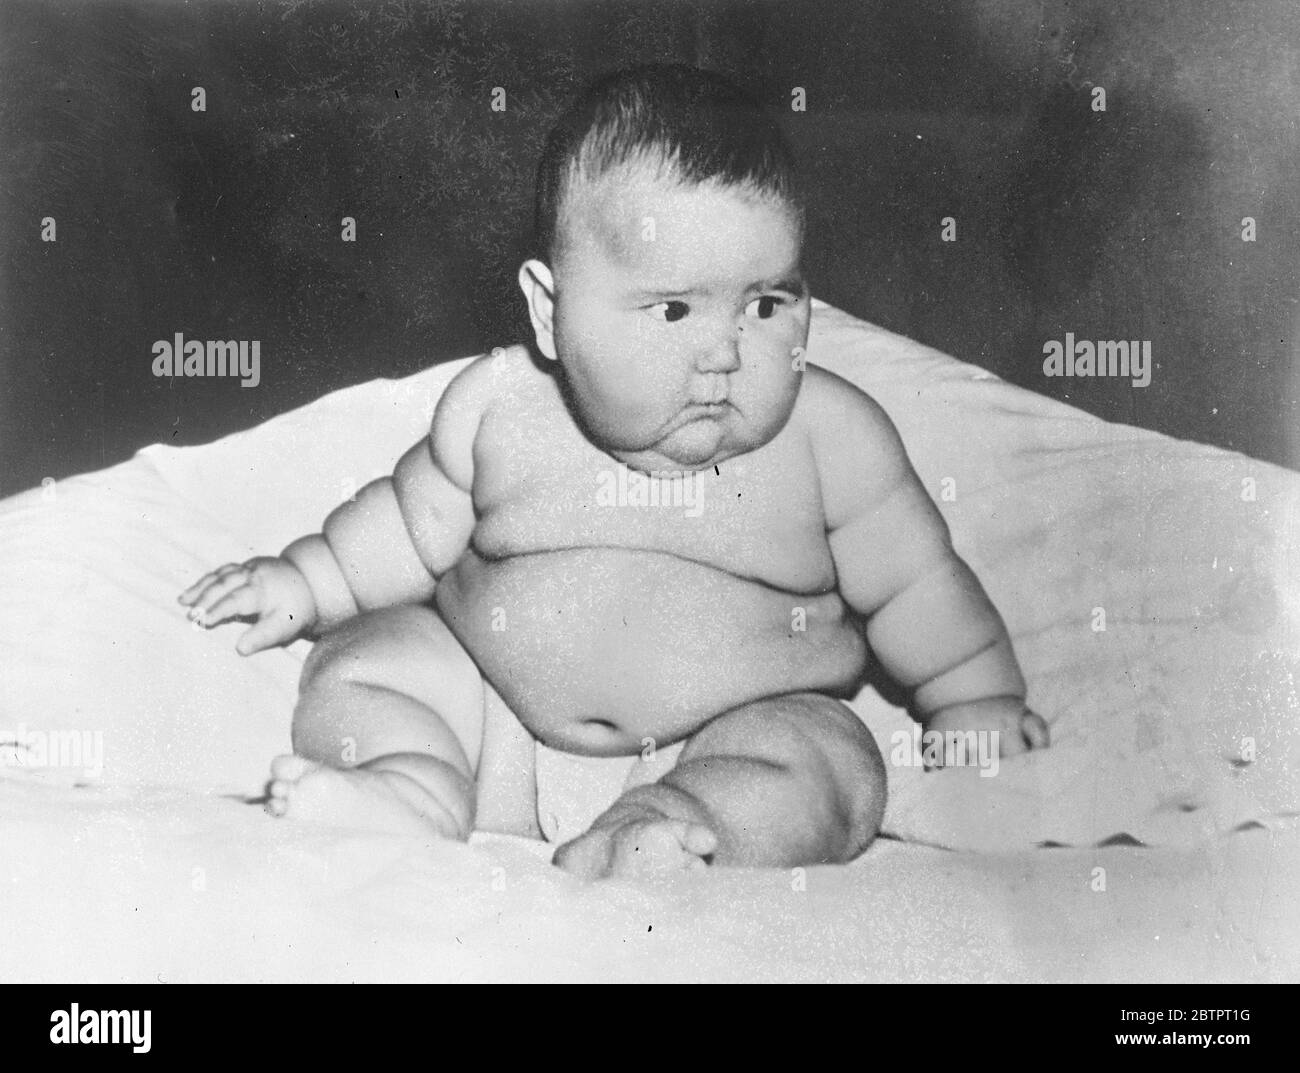 Kentucky's bouncing baby. Six months old, weighs 40 pounds, gaining every month. Although a normal size and weight at birth. Six months ago, Lambert Ballard Alsip is 2 feet in height, weighs 40 pounds and is gaining weight at the rate of 3 pounds each month, and this on a diet of mother's milk. Lambert's parents are only 18 years old and live at Cumberland Fallsin the Kentucky mountains, USA. The father is 5'7 and the mother, 5'5. Lambert is the first baby. 14 November 1937 Stock Photo